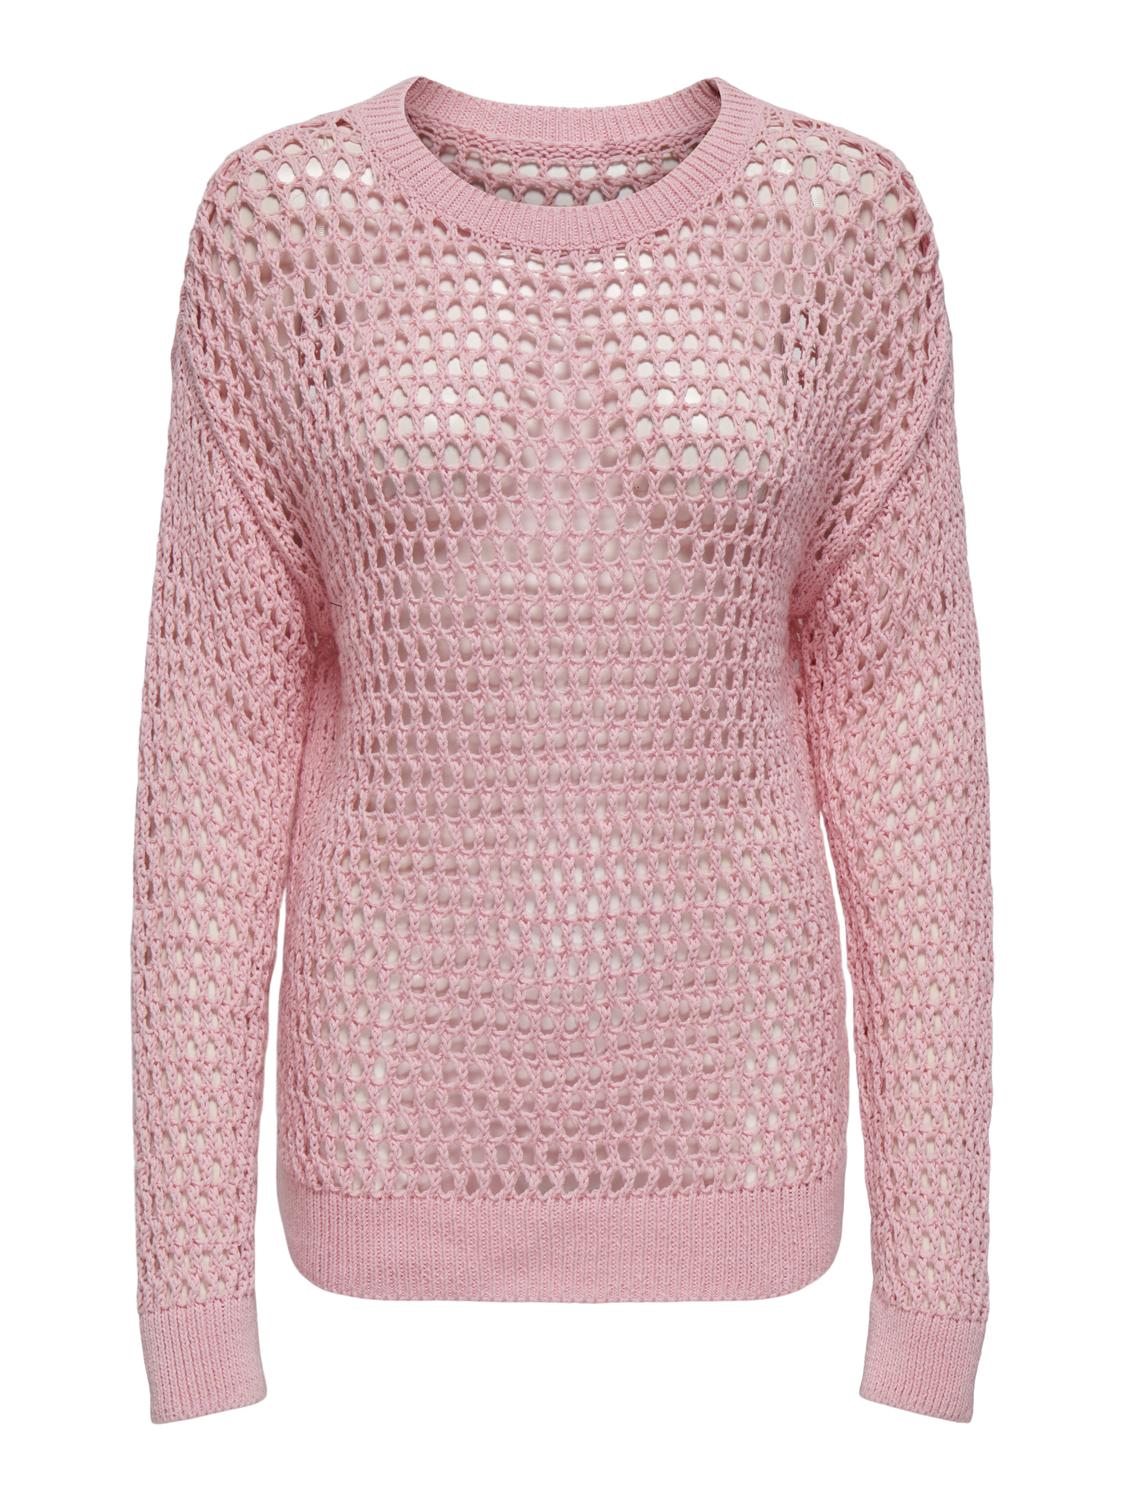 ONLY O-neck knit pullover -Candy Pink - 15317718